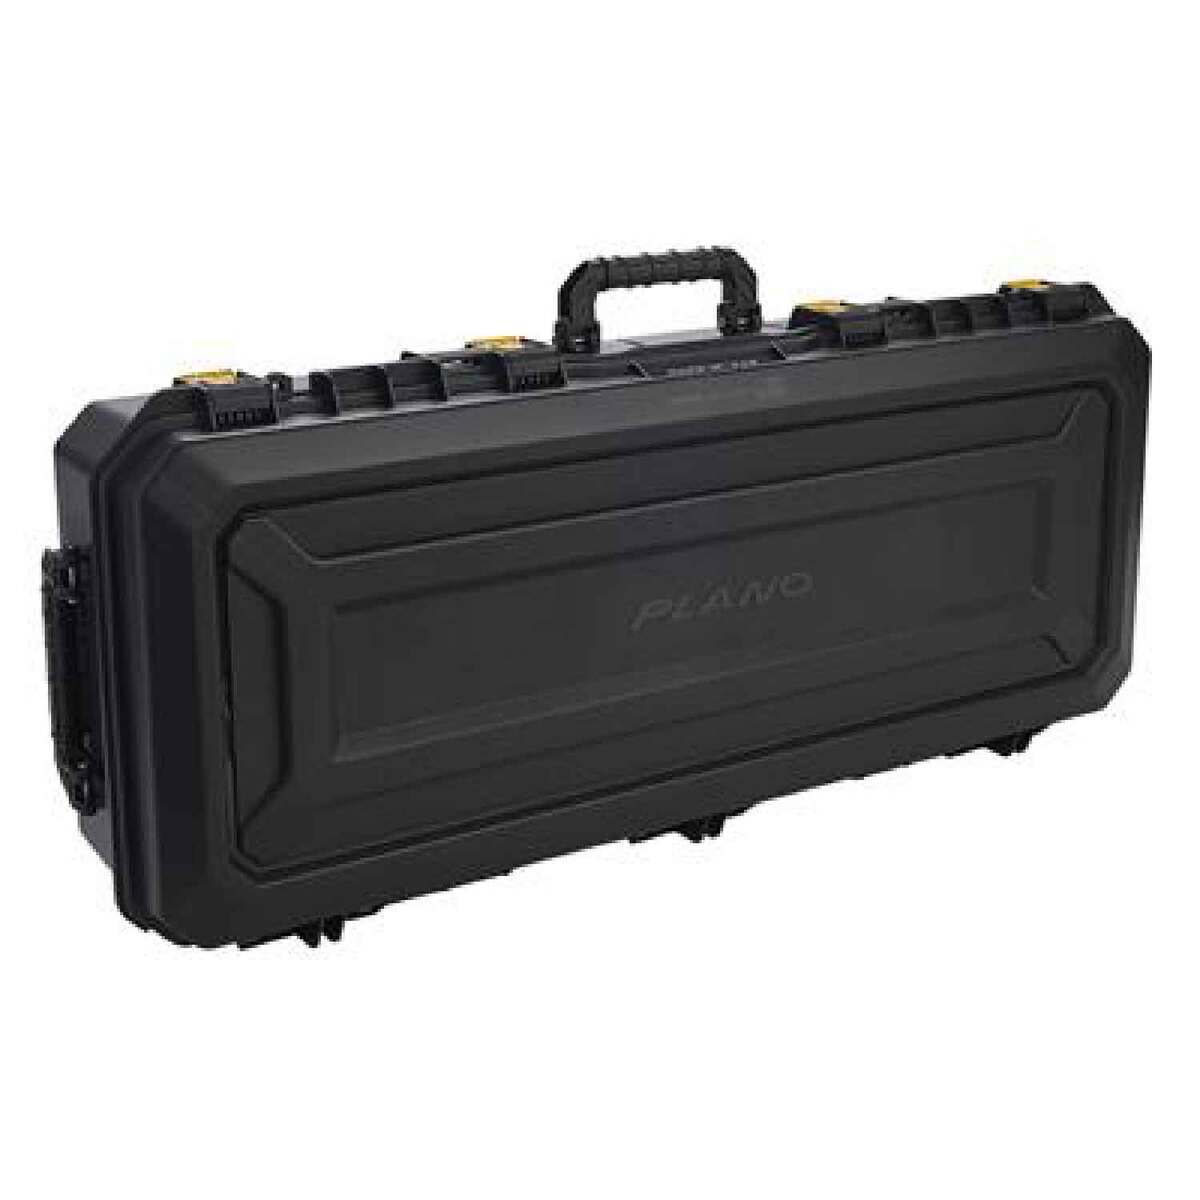 Plano AW2 Black All Weather Ultimate Bow Case | Sportsman's Warehouse